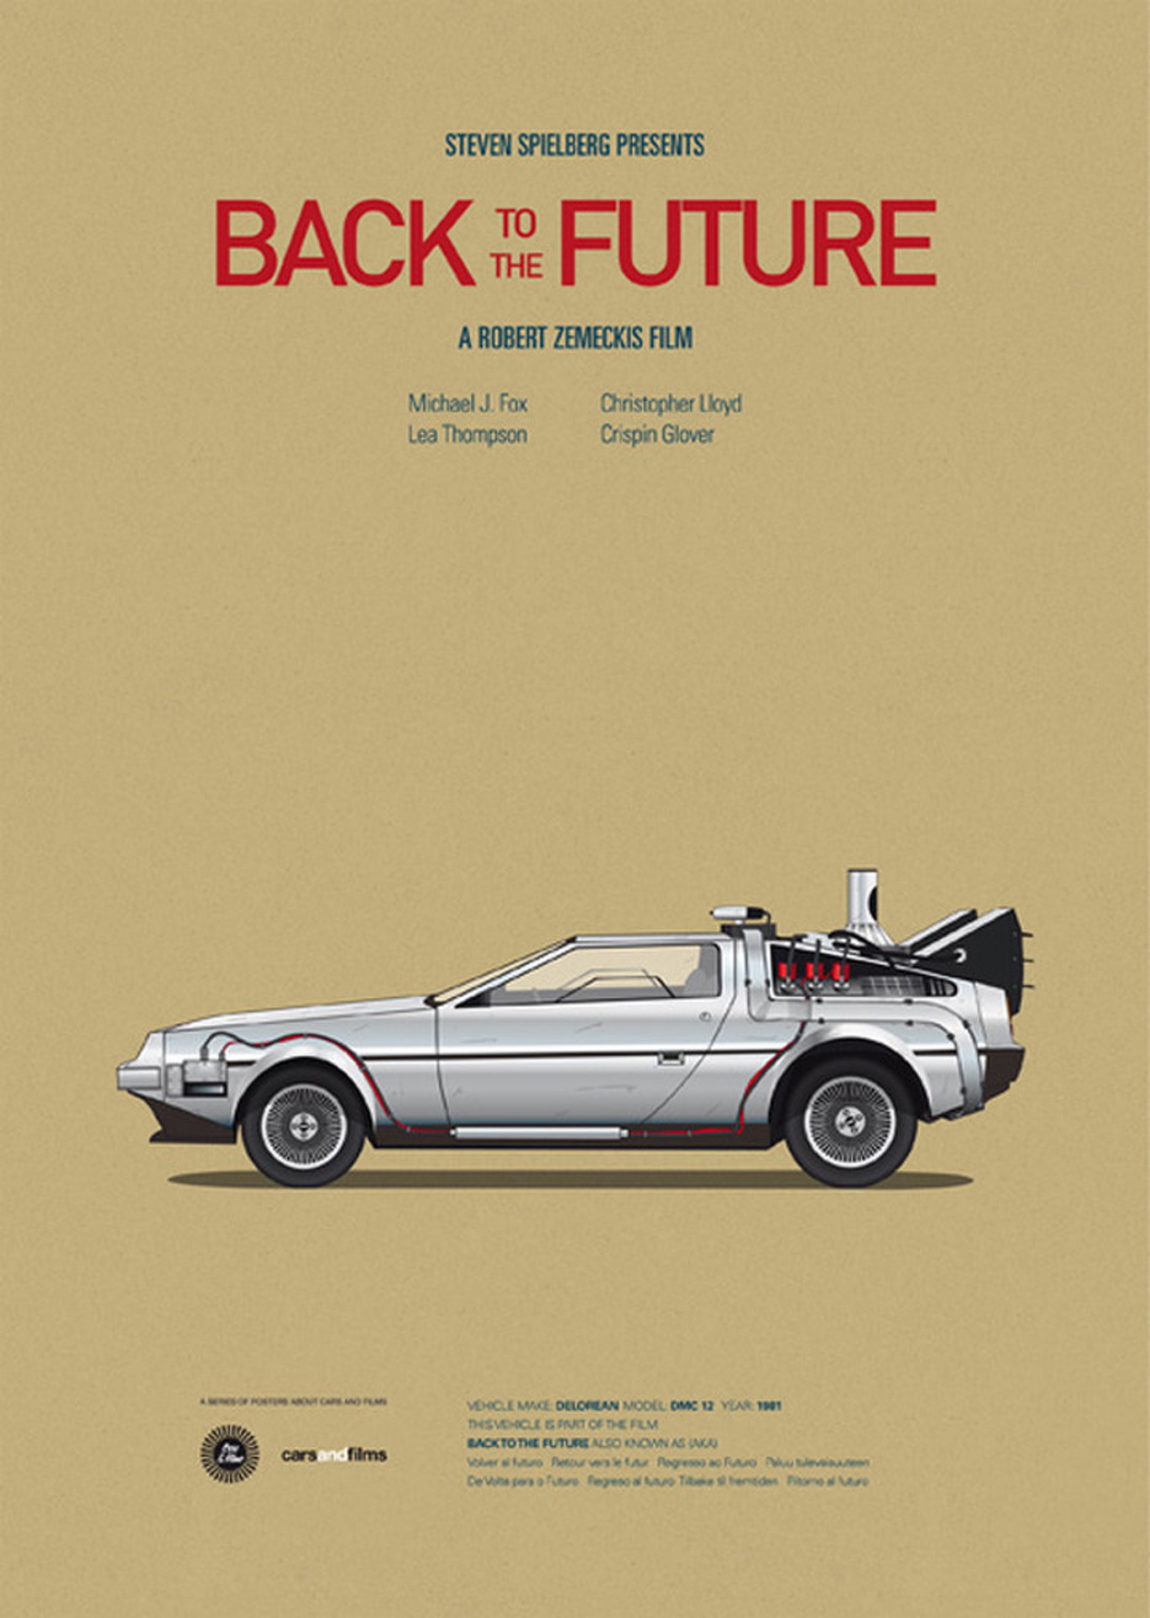 these movie car posters are a must for film buffs